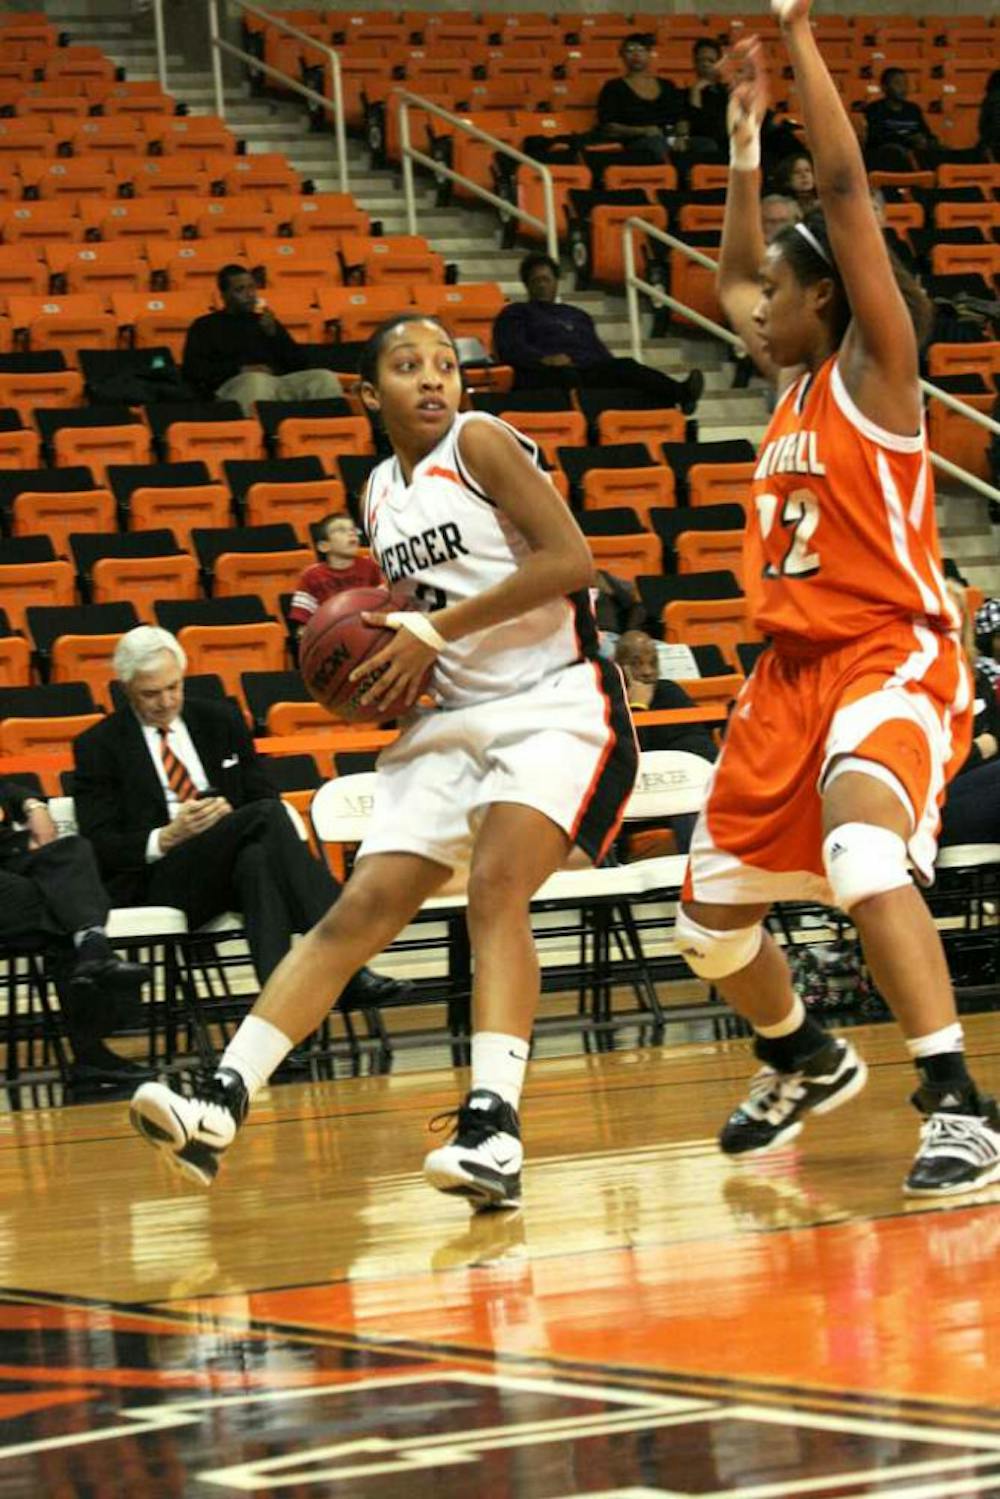 Briana Williams has been a bright spot for Mercer this season, scoring more than 30 points three times in 2010-11.